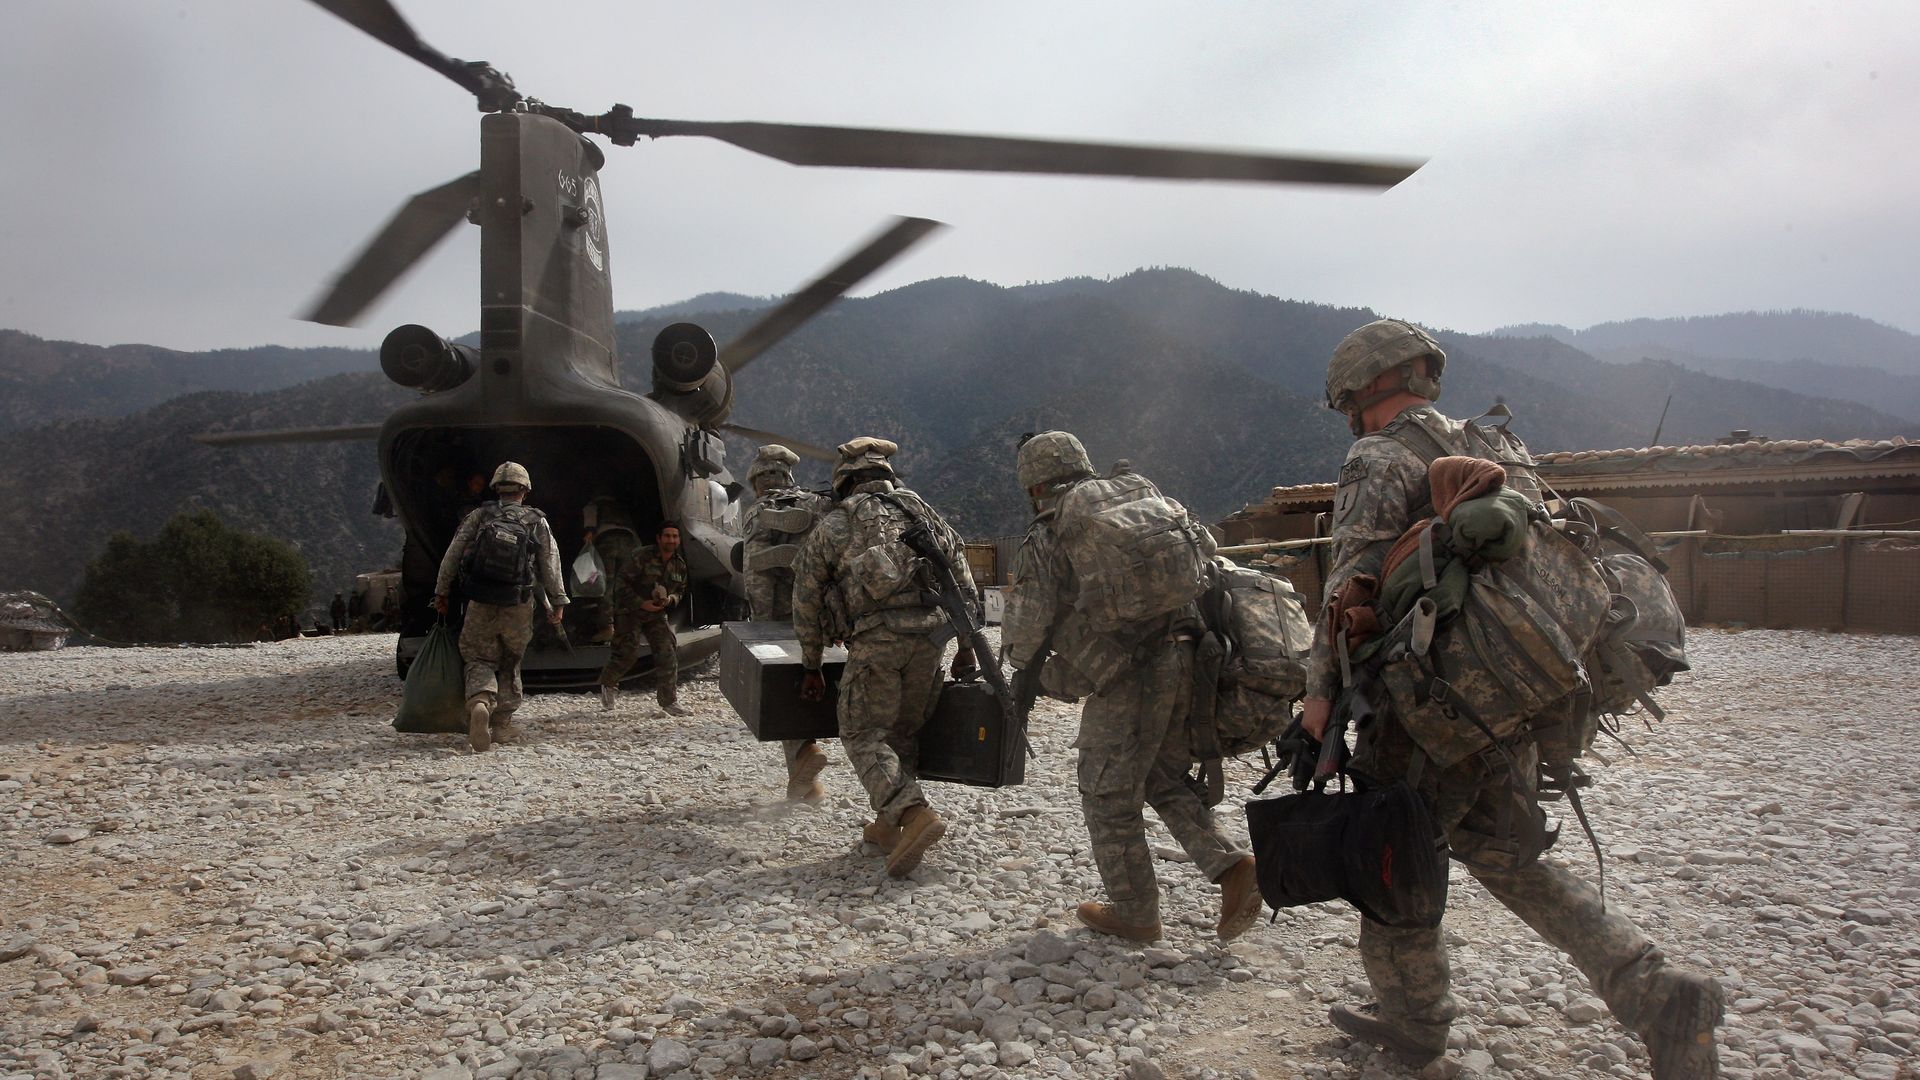 U.S. soldiers boarding a helicopter in the Korengal Valley, Afghanistan, in October 2008.